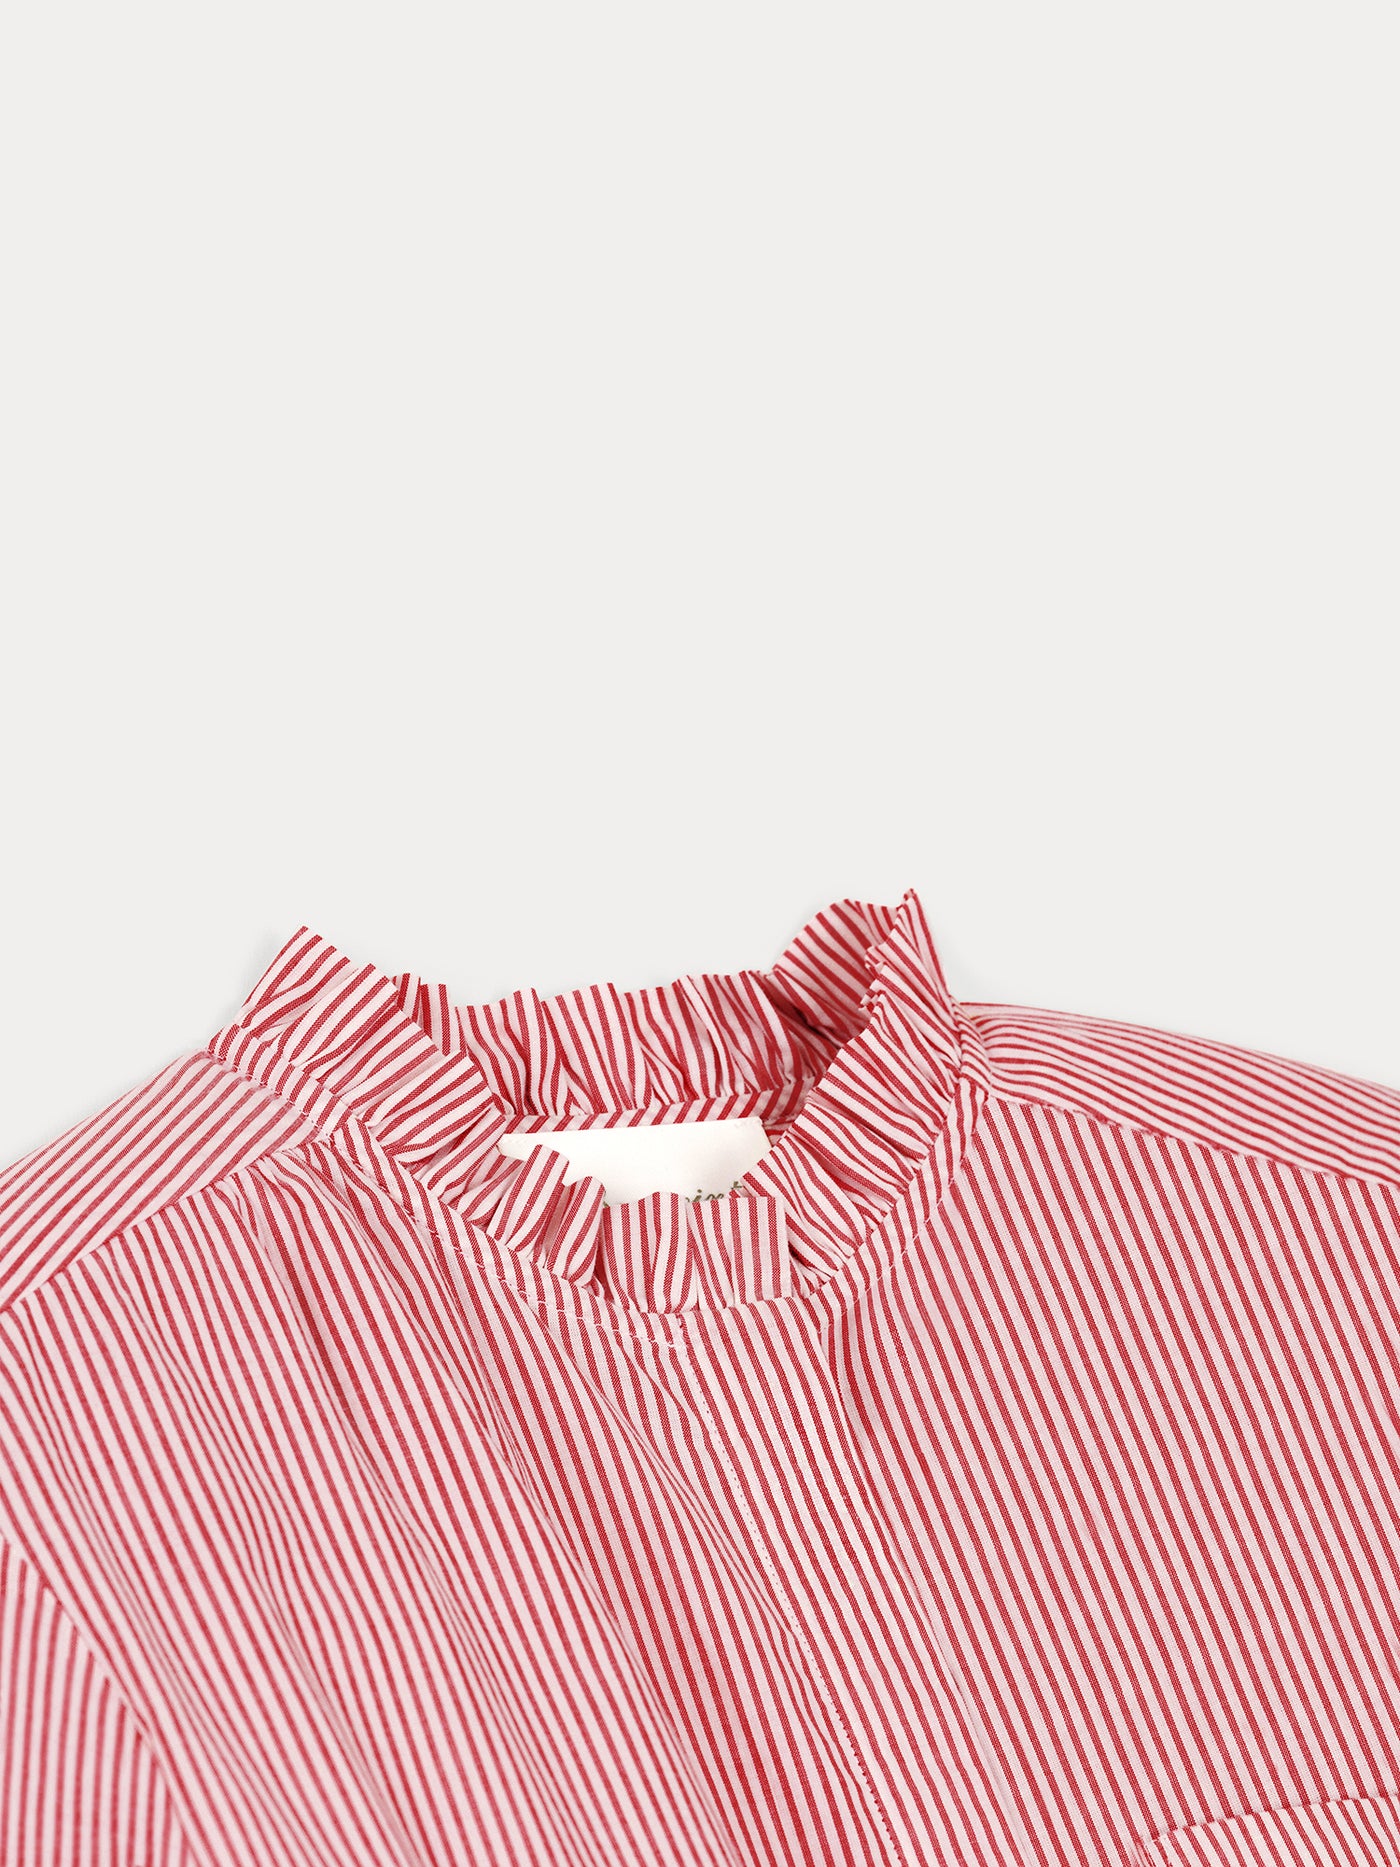 Red and white striped shirt in cotton